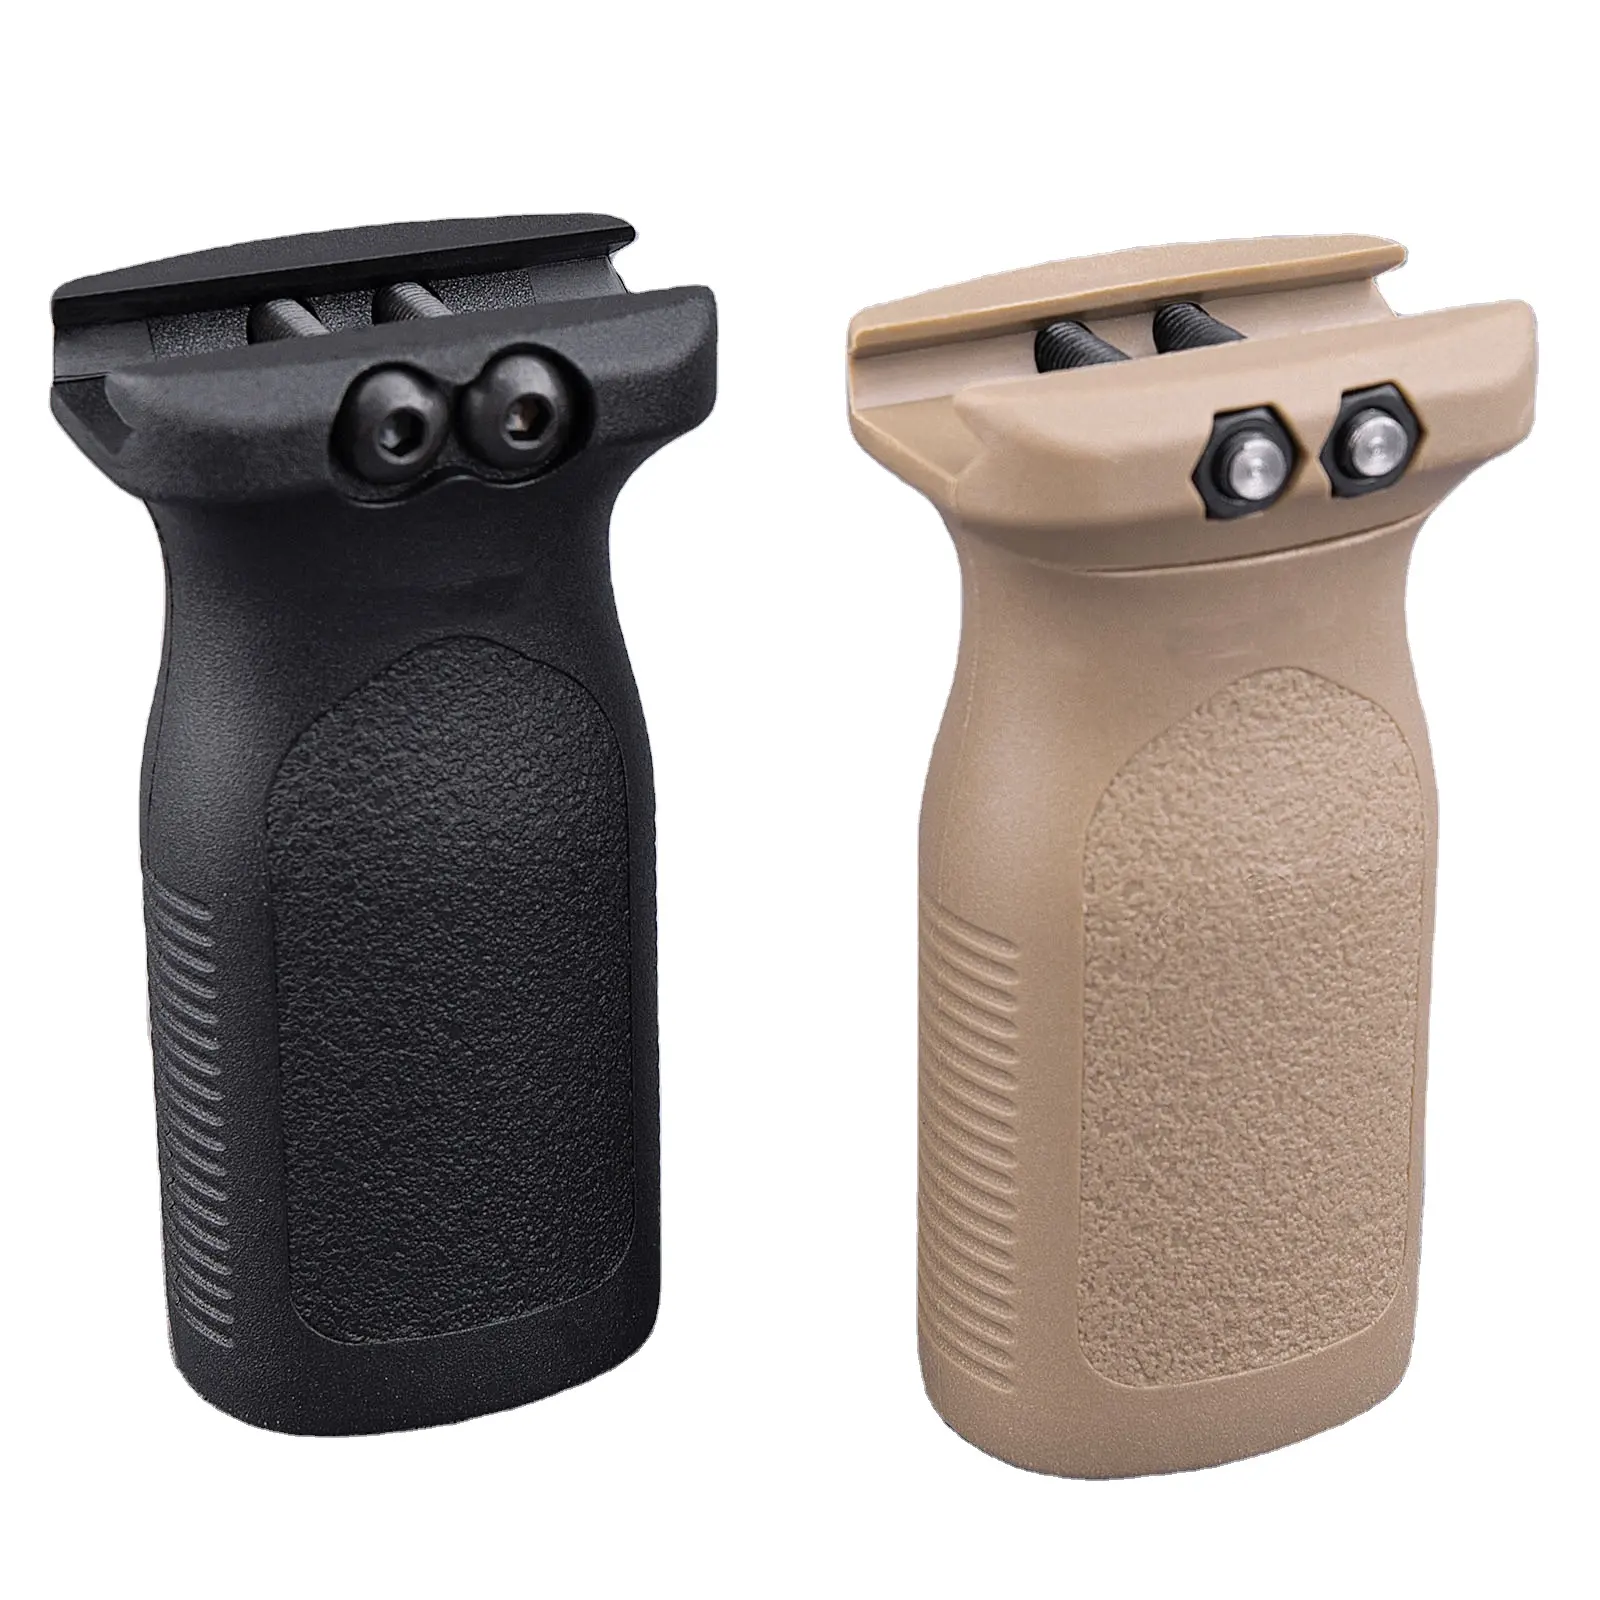 Toy Gun Nylon Handle Tactical Rail Handle Vertical Bracket For Universal Rail Replacement Accessories